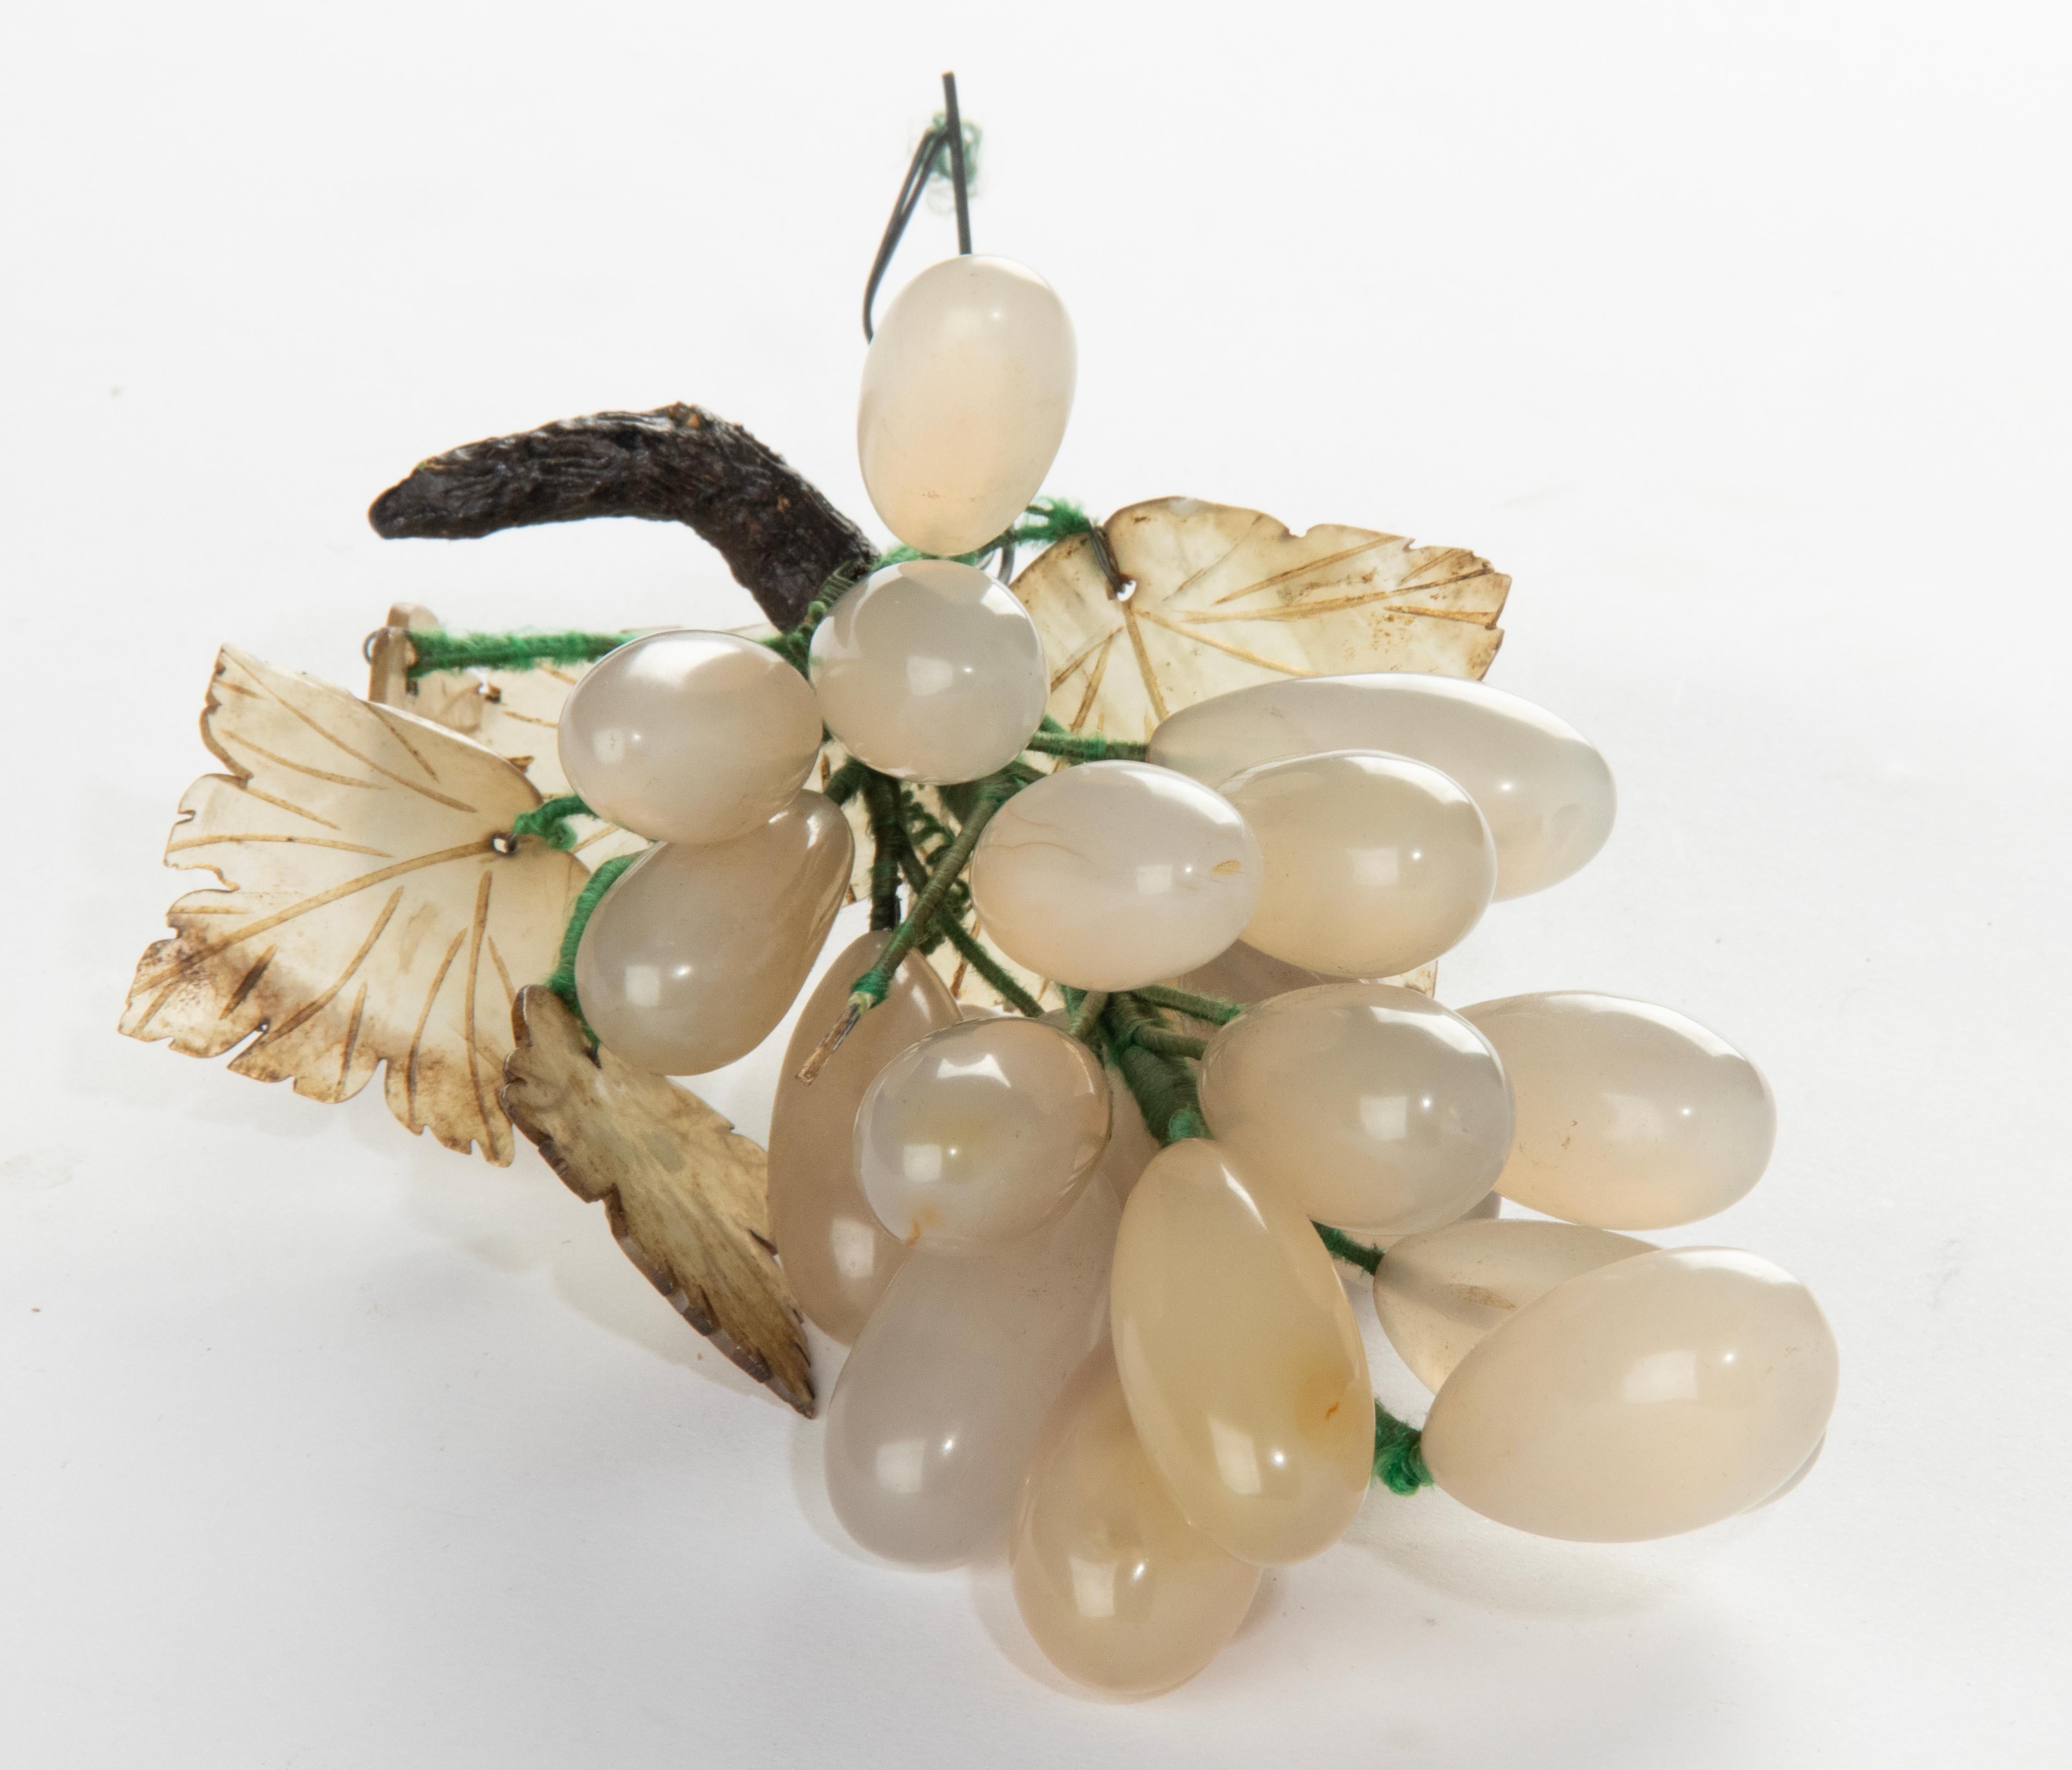 Hand-Crafted Antique Decorative Bunch of Grapes made of Quartz Stone For Sale